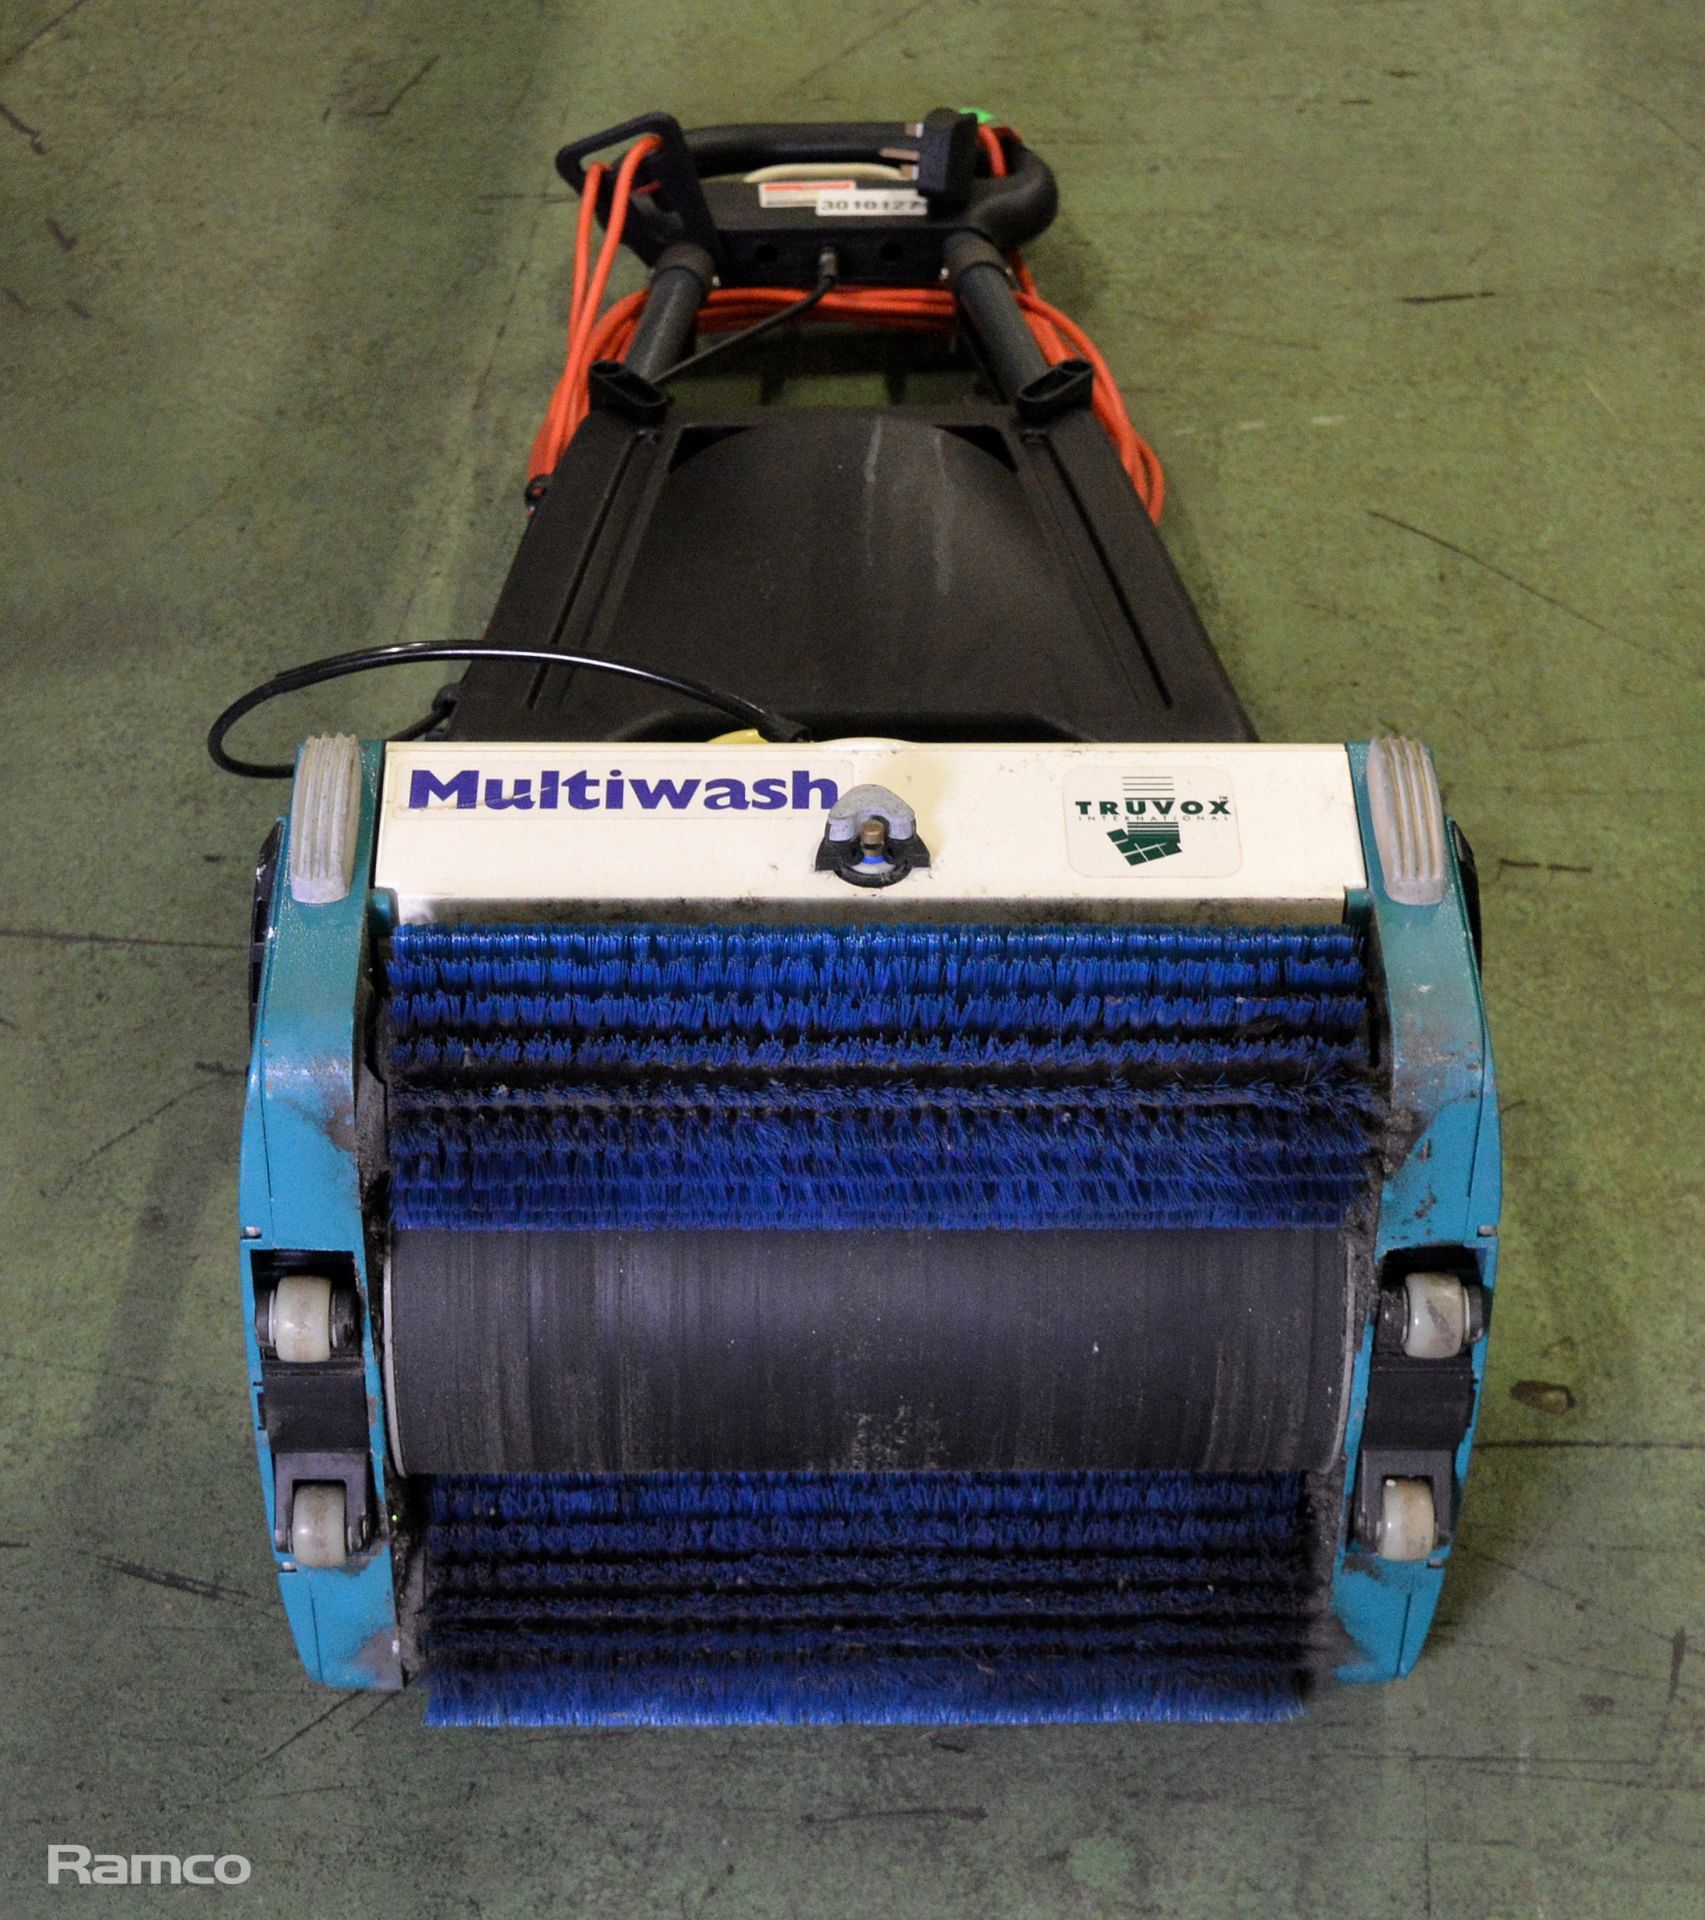 Truvox MW440 Multiwash Pump New Mains Powered Scrubber Dryer - Image 3 of 3